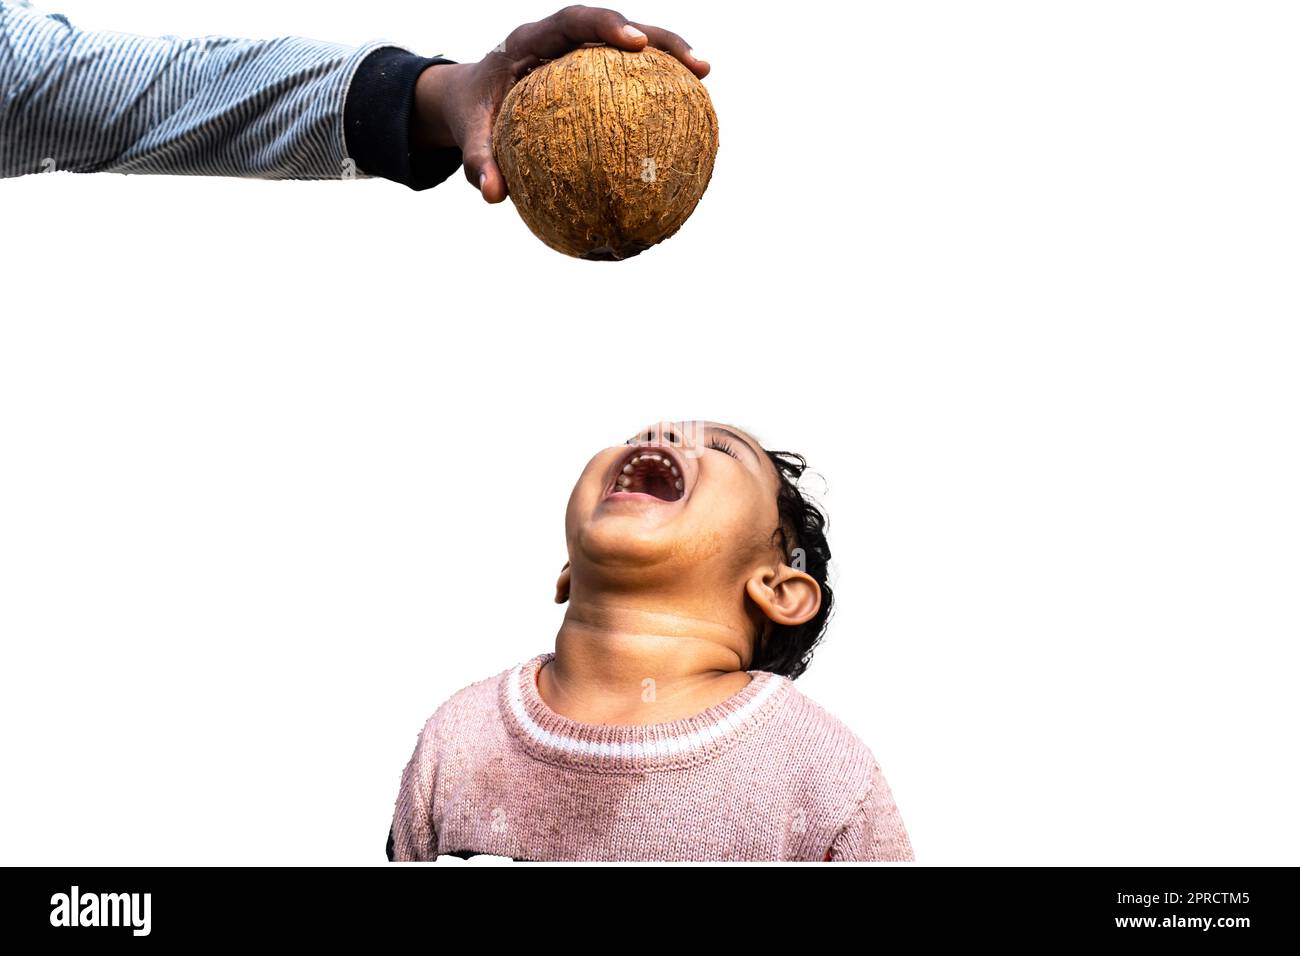 Asian Little boy child drinks coconut water from a fresh coconut. Stock Photo